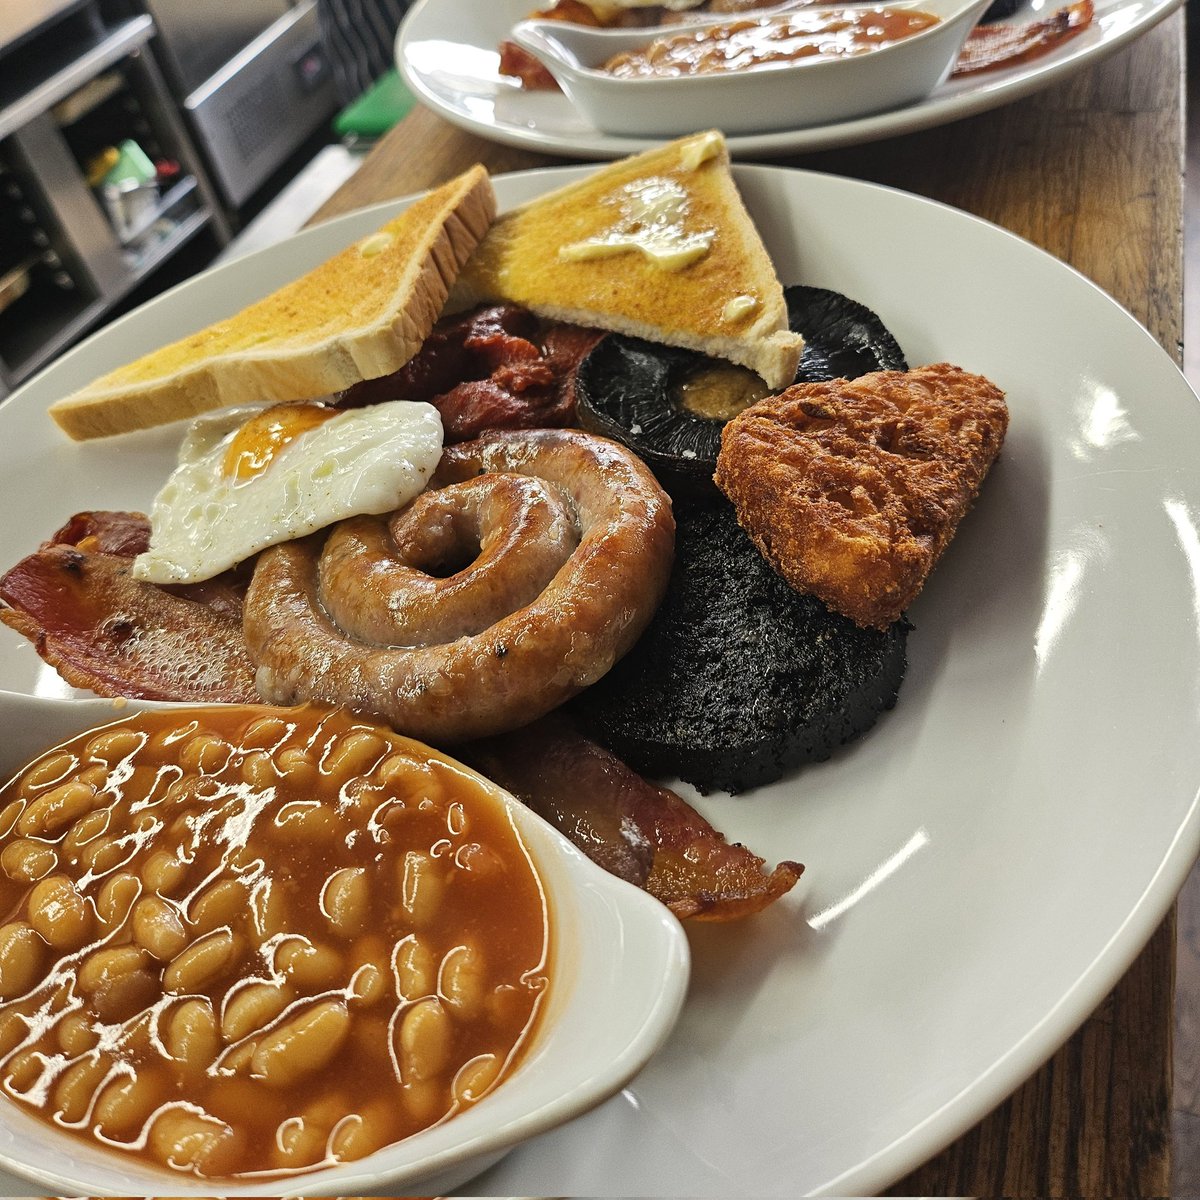 The sun is shining, the chefs are in, and we are getting full English breakfasts out to the masses!